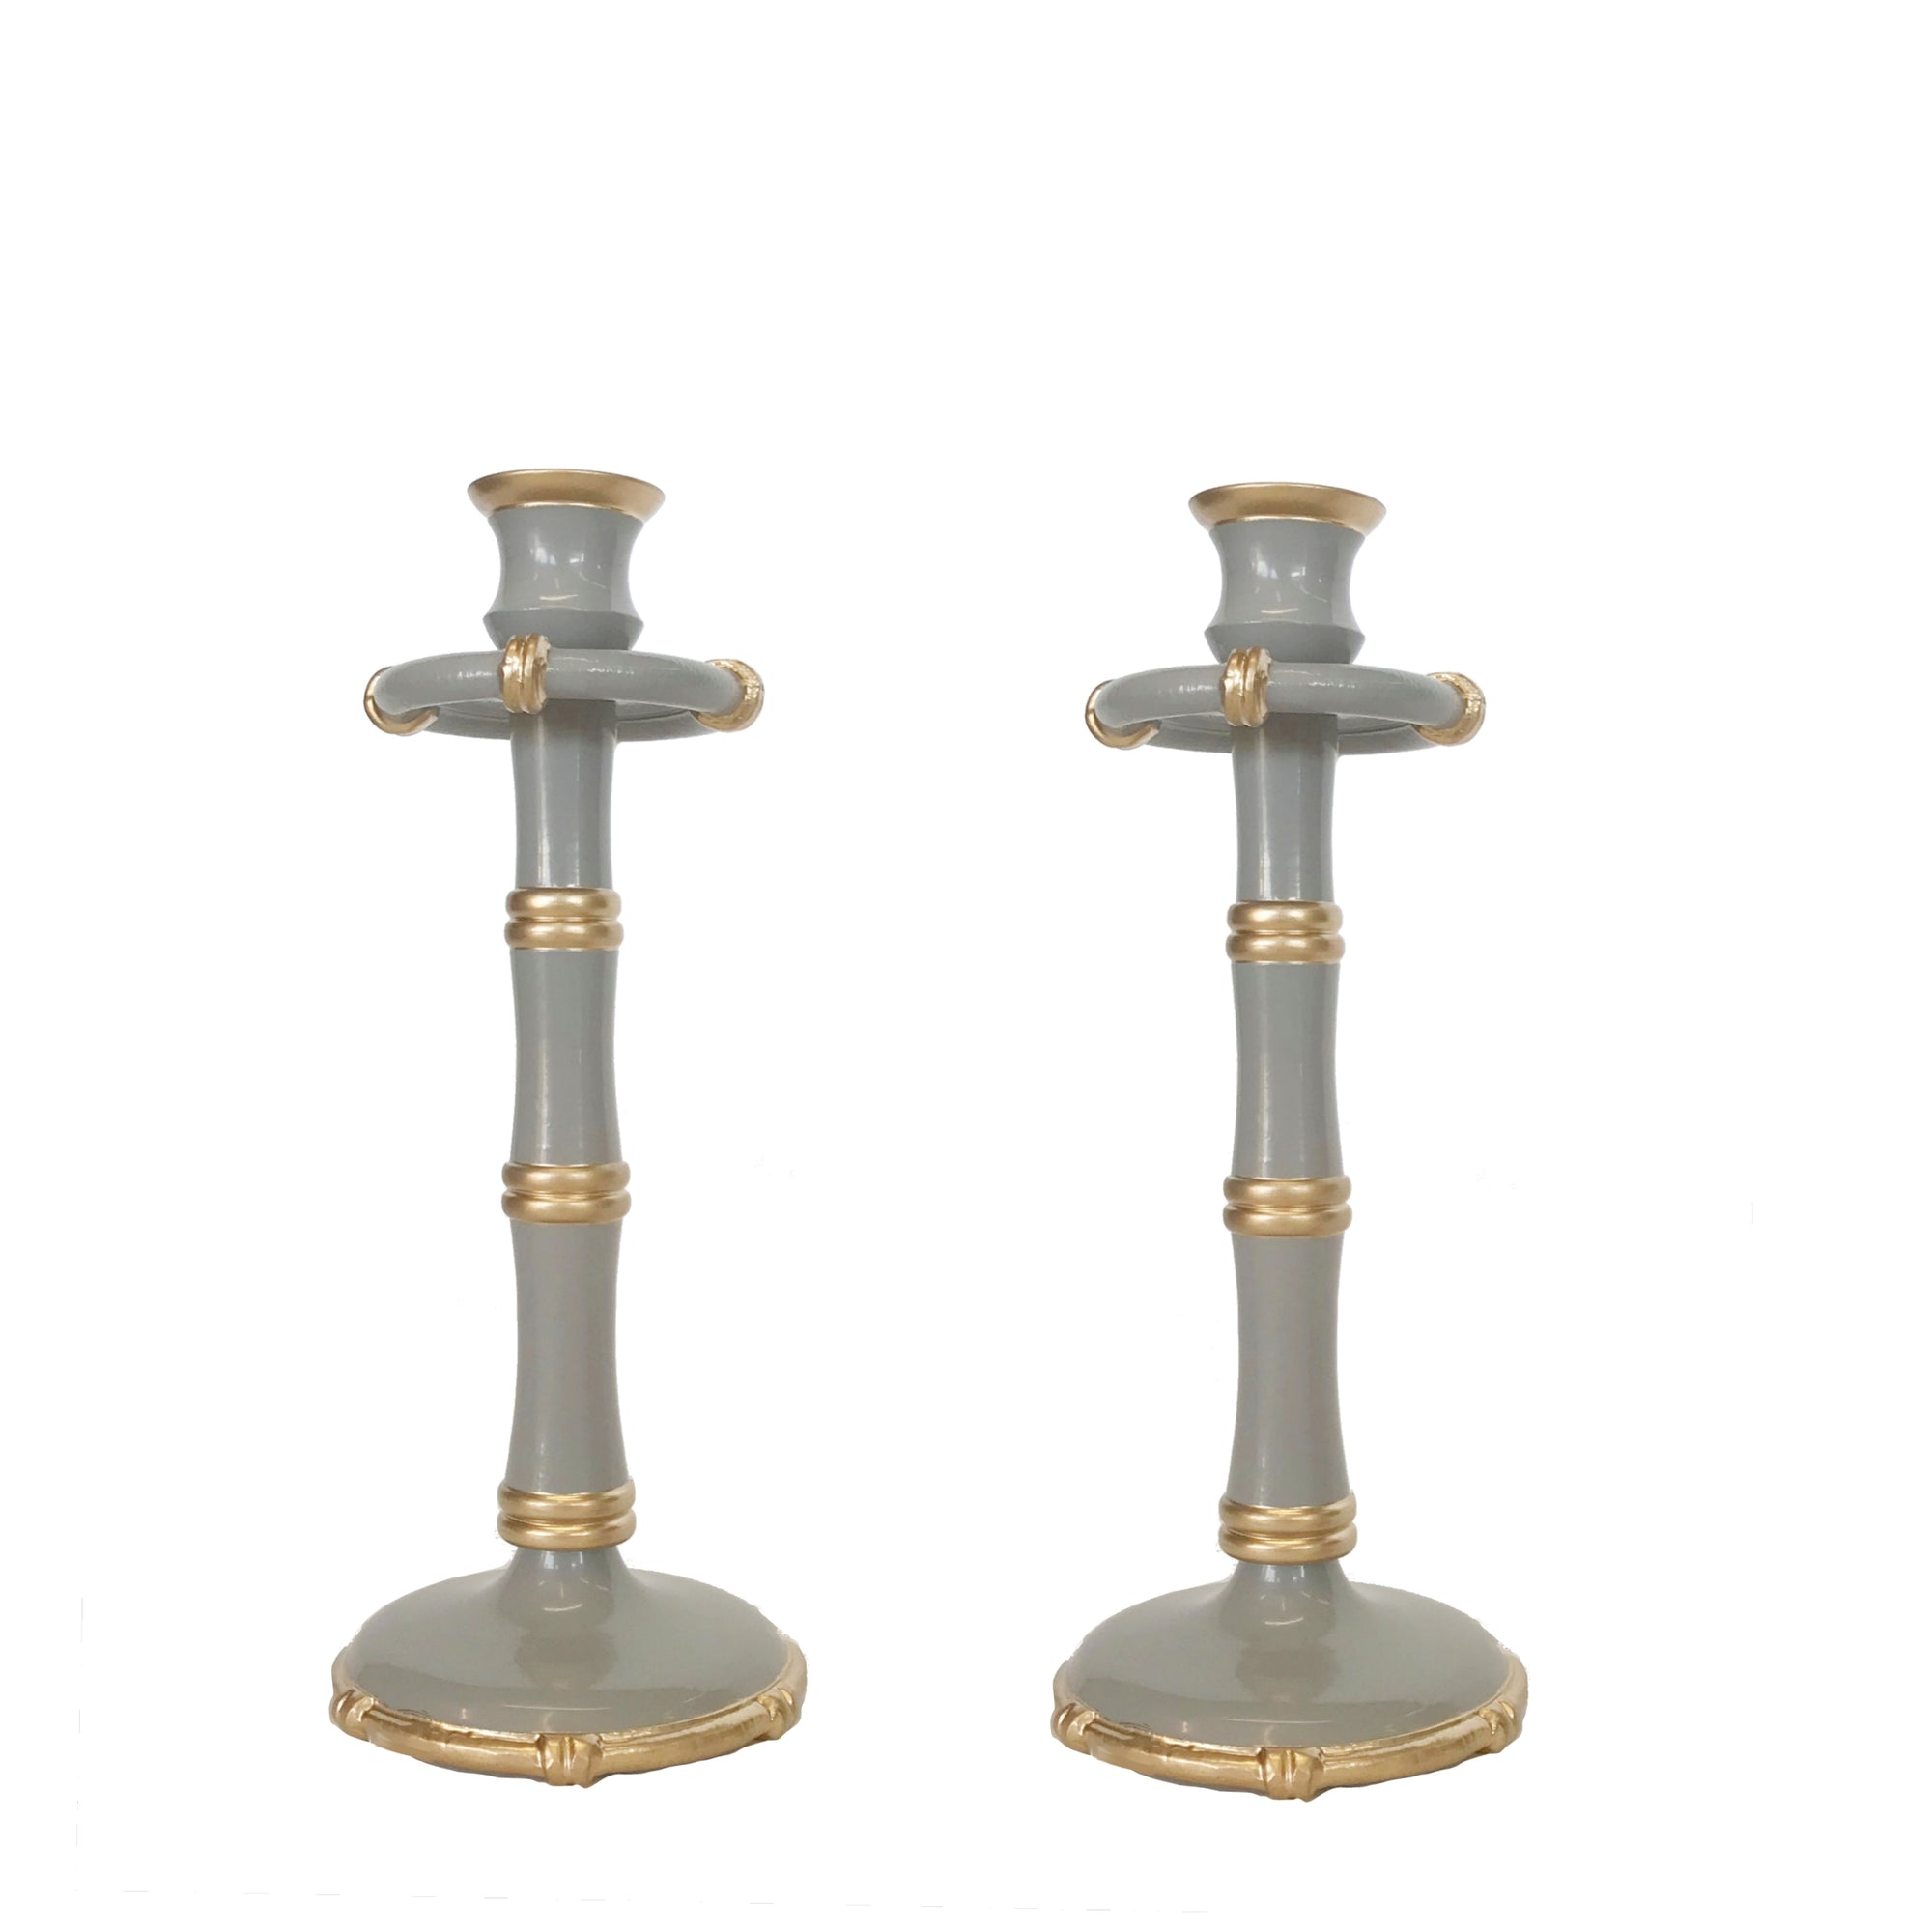 Pair of Tall Bamboo Candlesticks in Grey